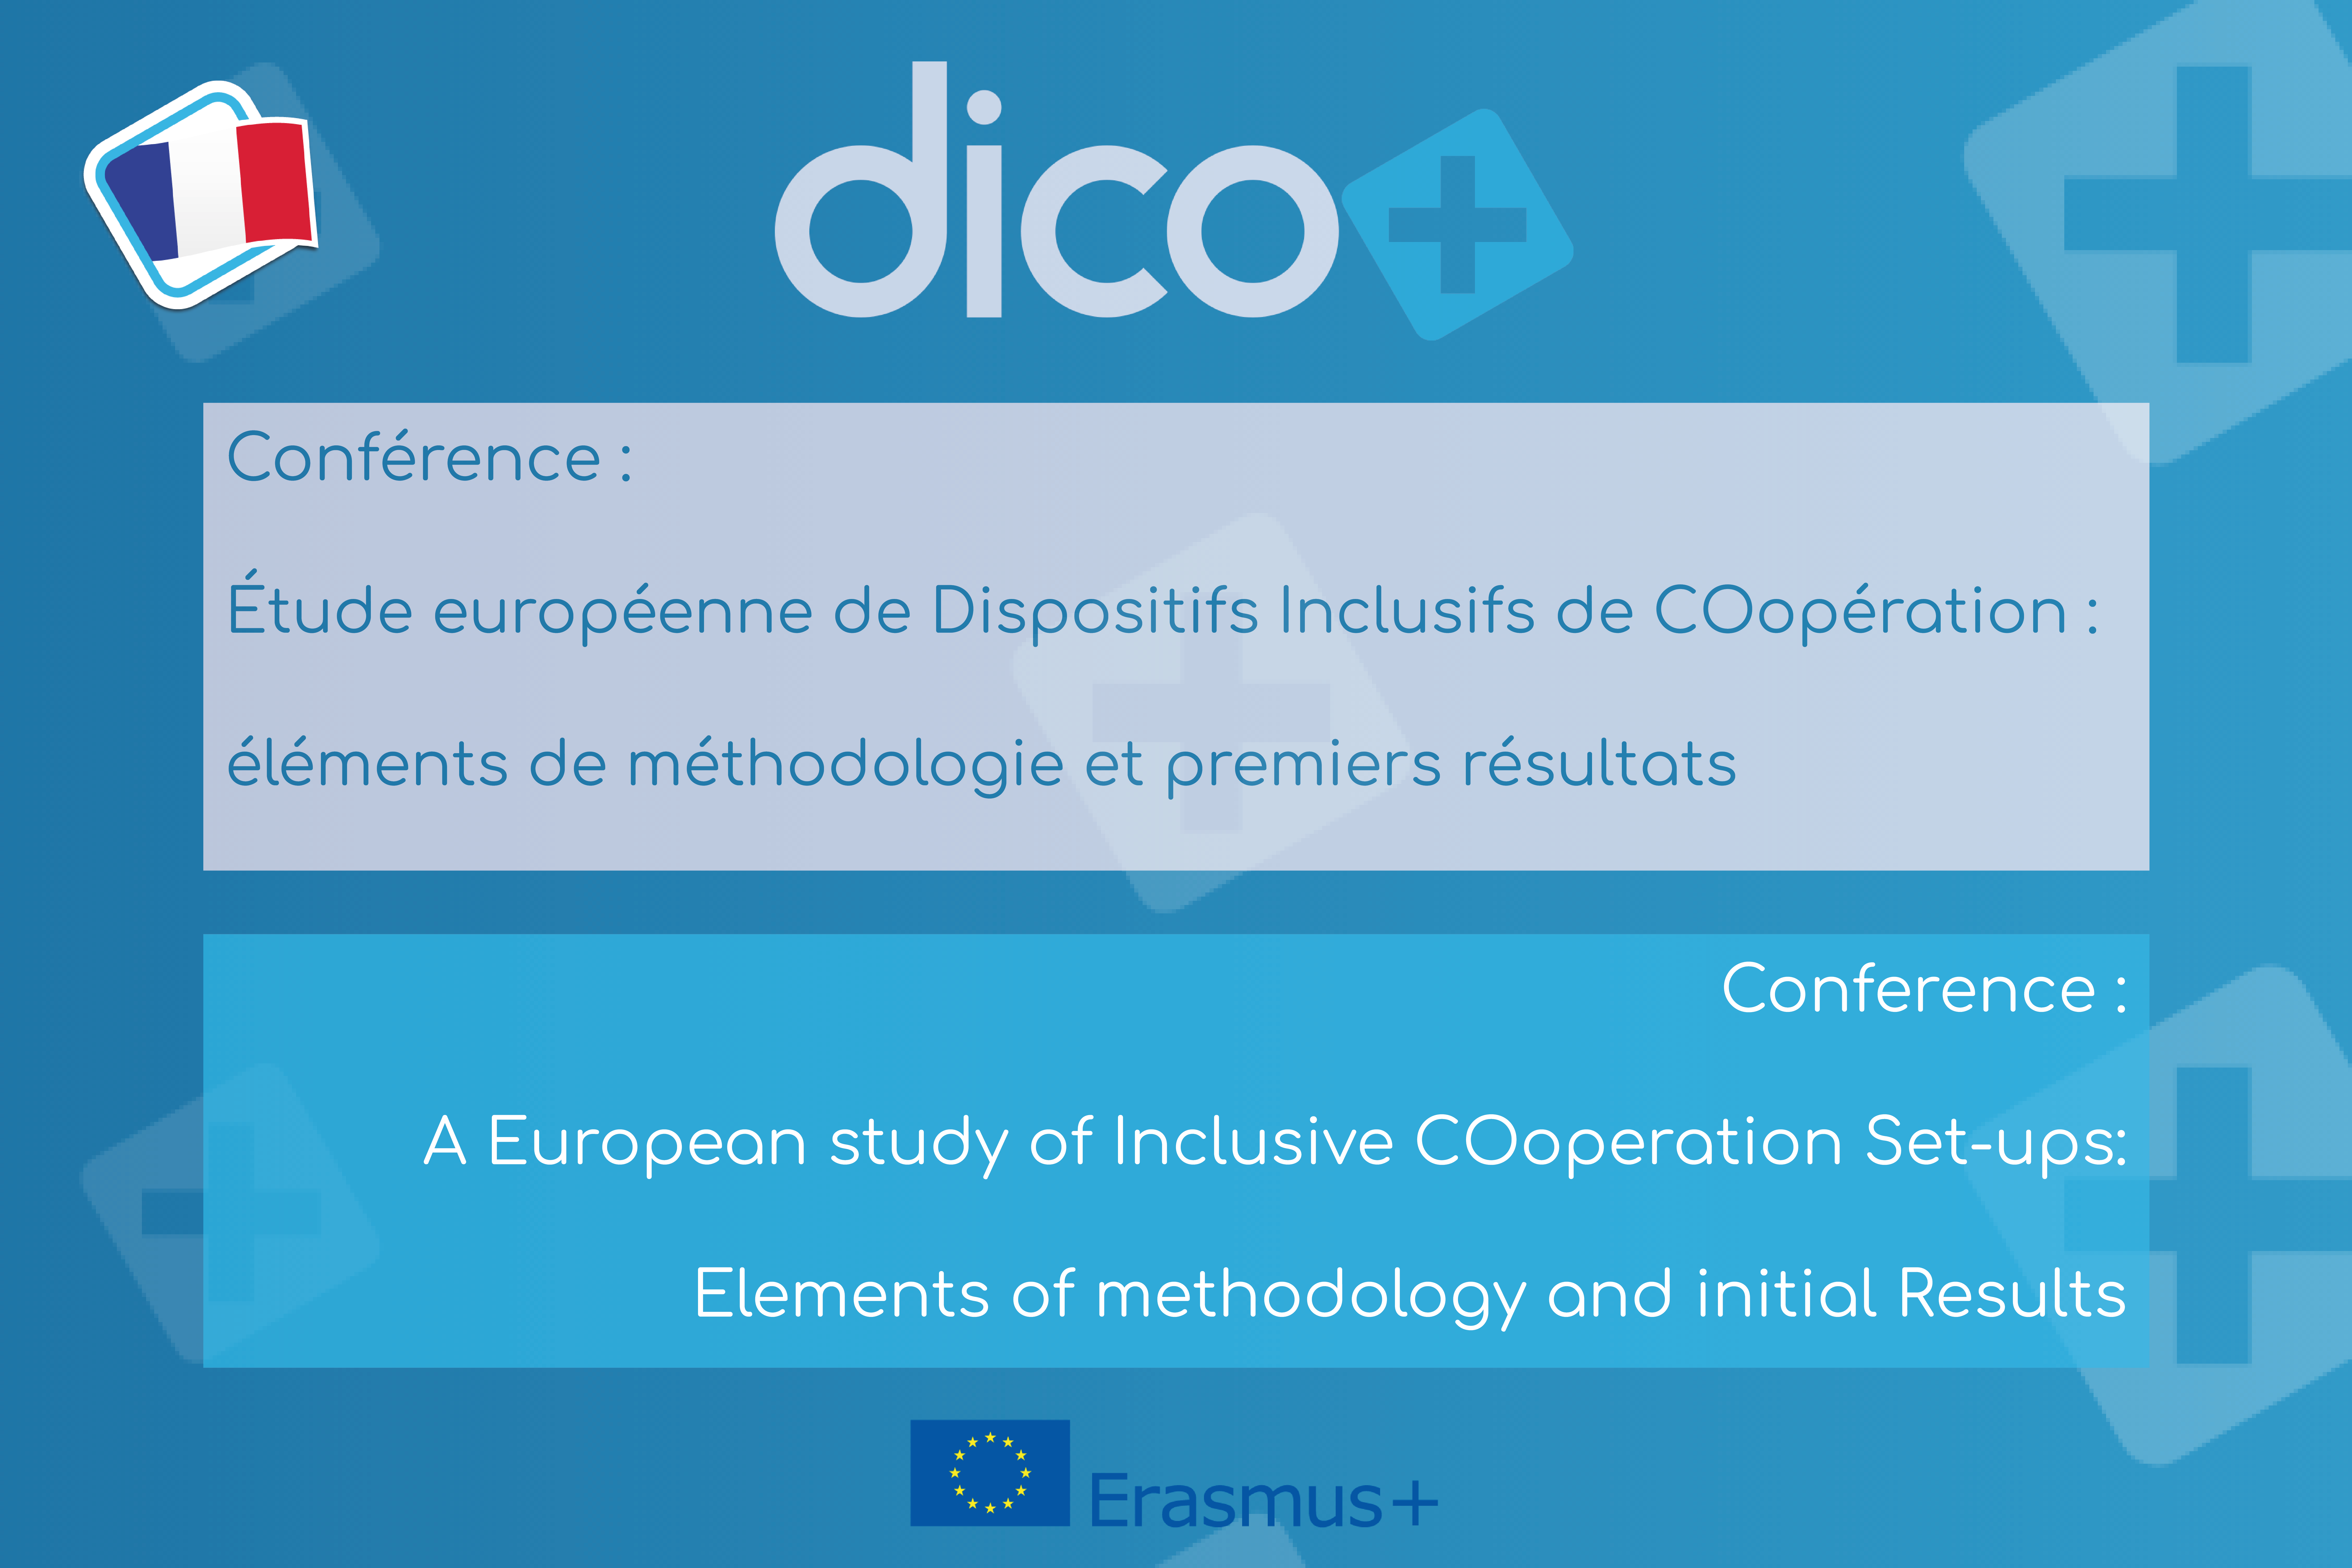 A European study of Inclusive COoperation Set-ups:  Elements of methodology and initial Results